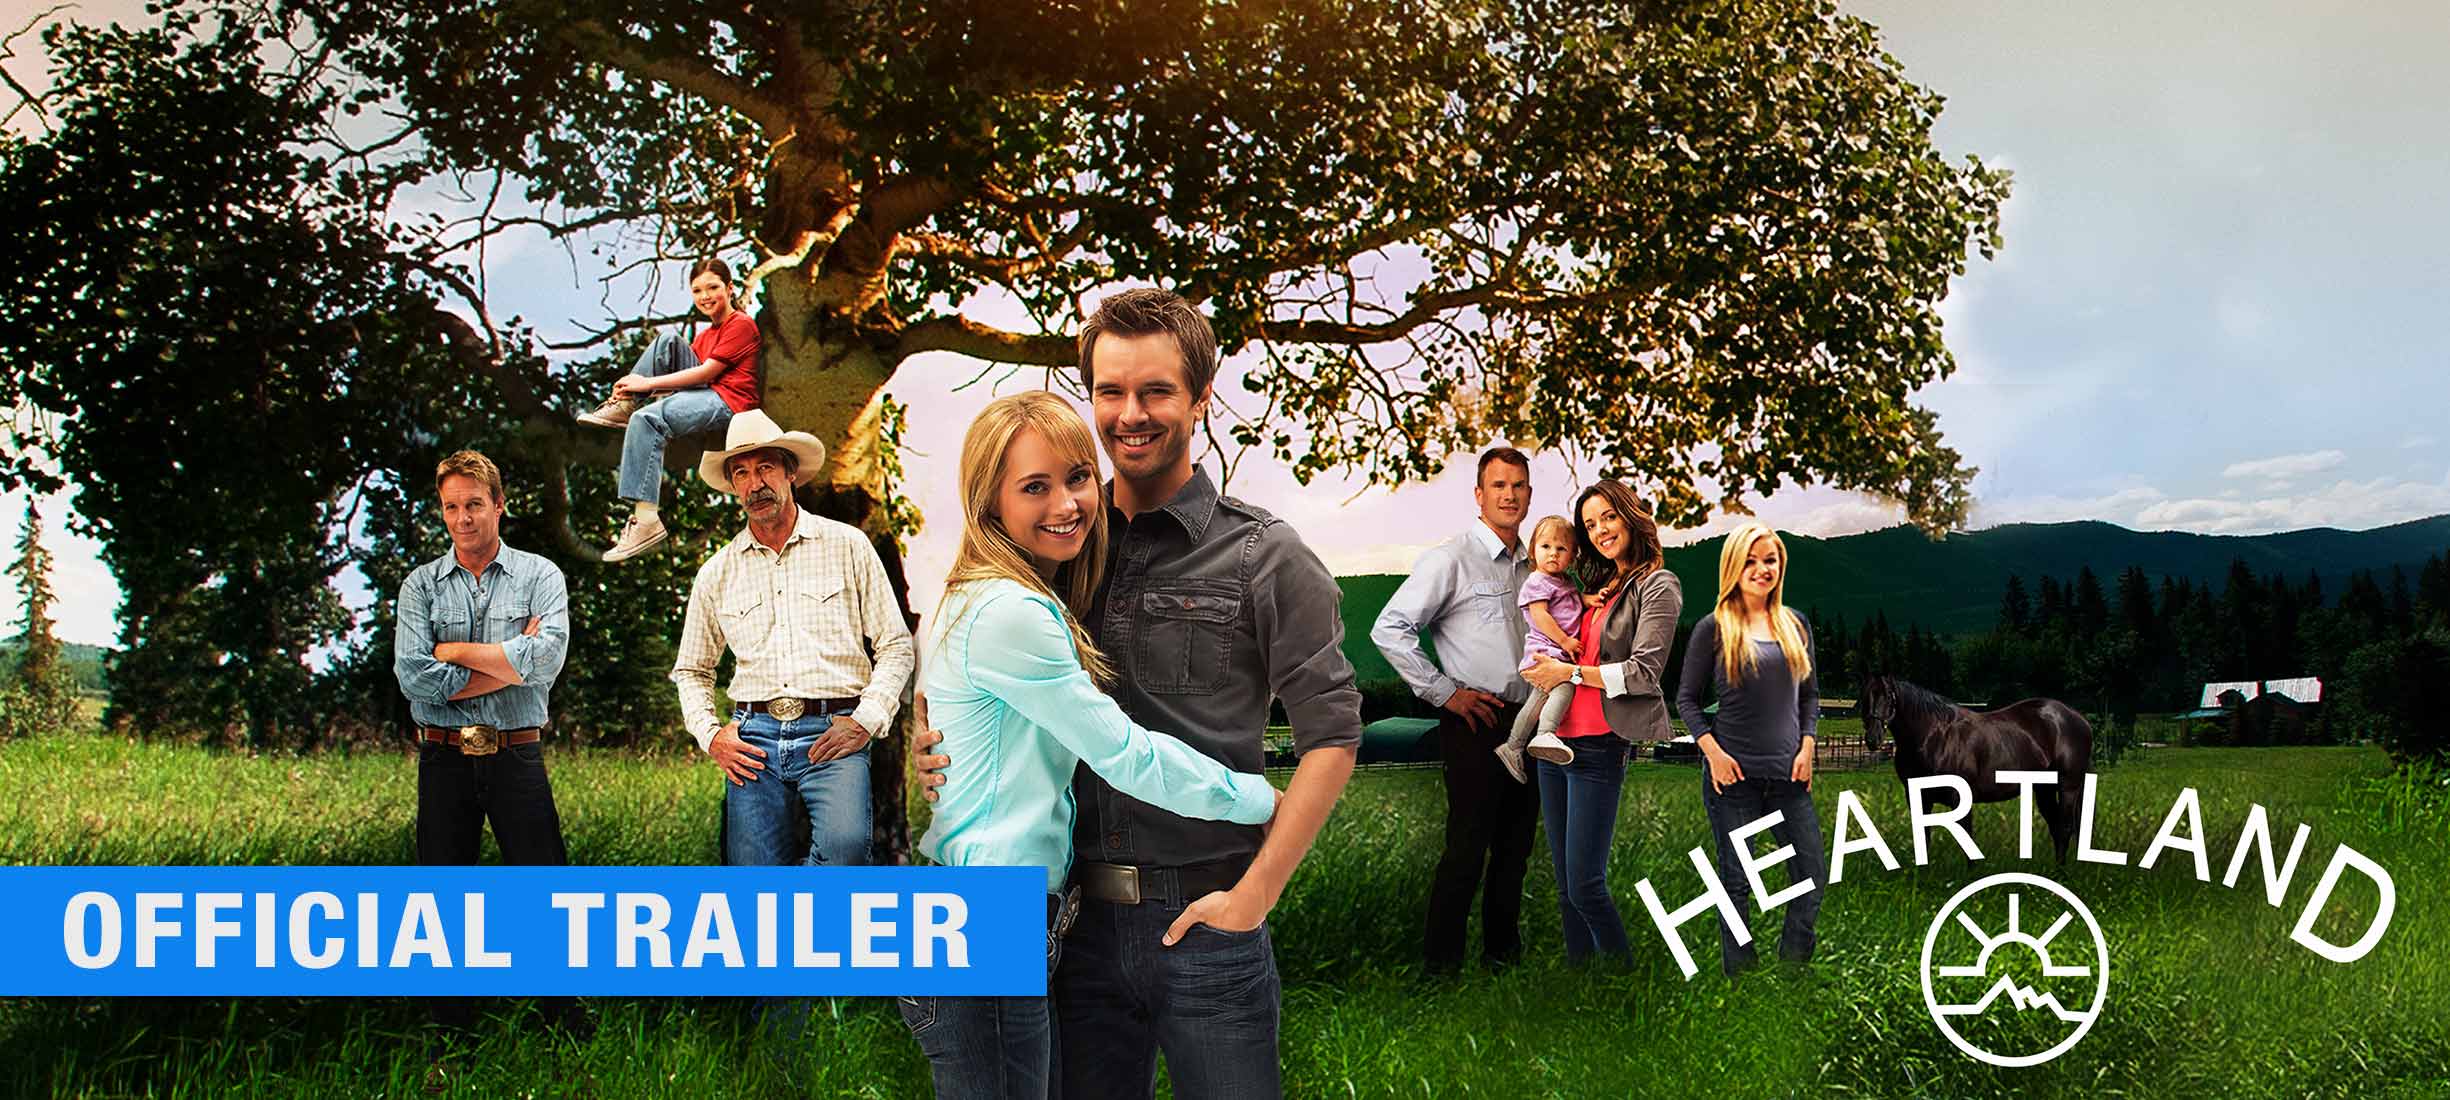 Start Your Free Month and Watch Heartland Official Trailer Pure Flix